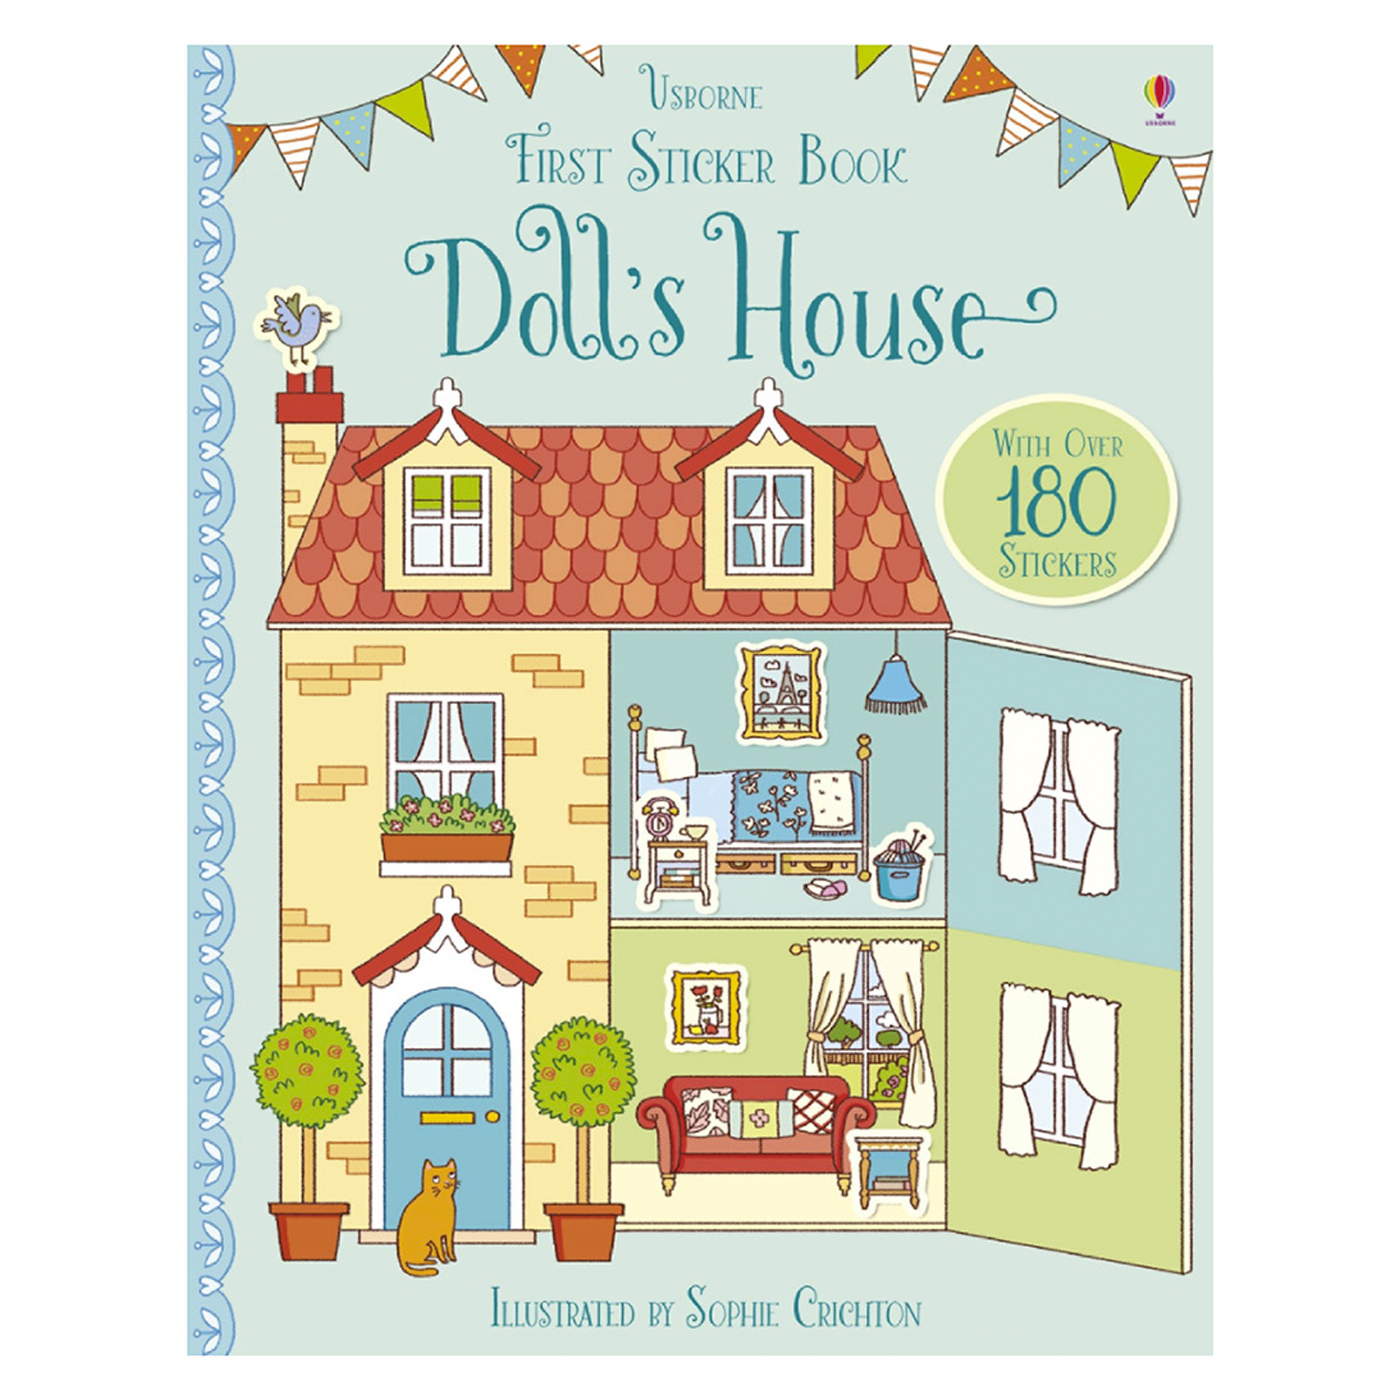  First Sticker Book Doll's House